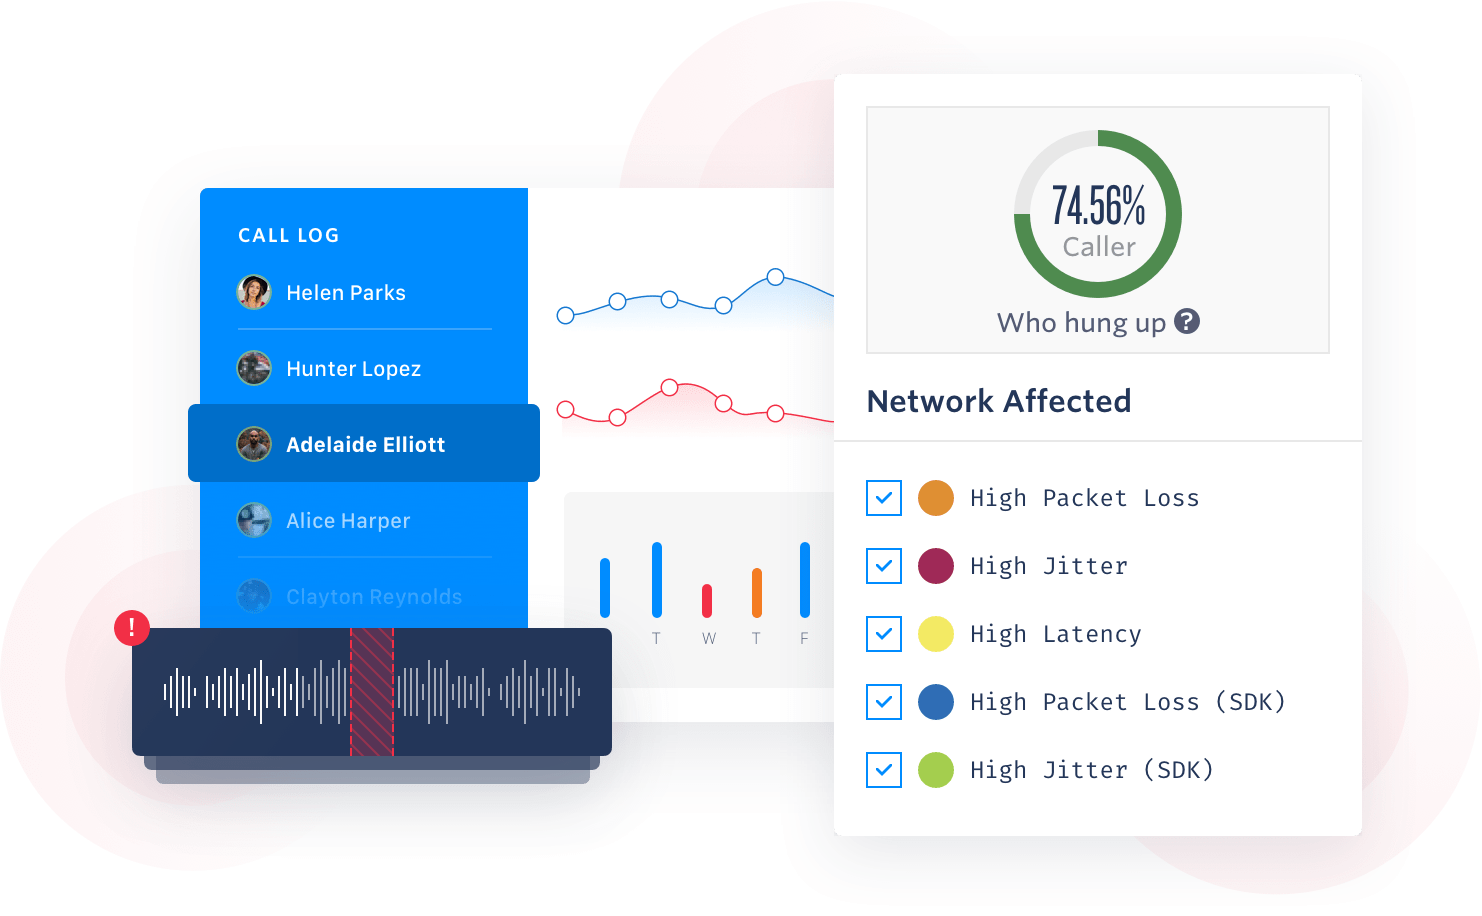 Deliver exceptional call experiences consistently with Voice Insights by Twilio